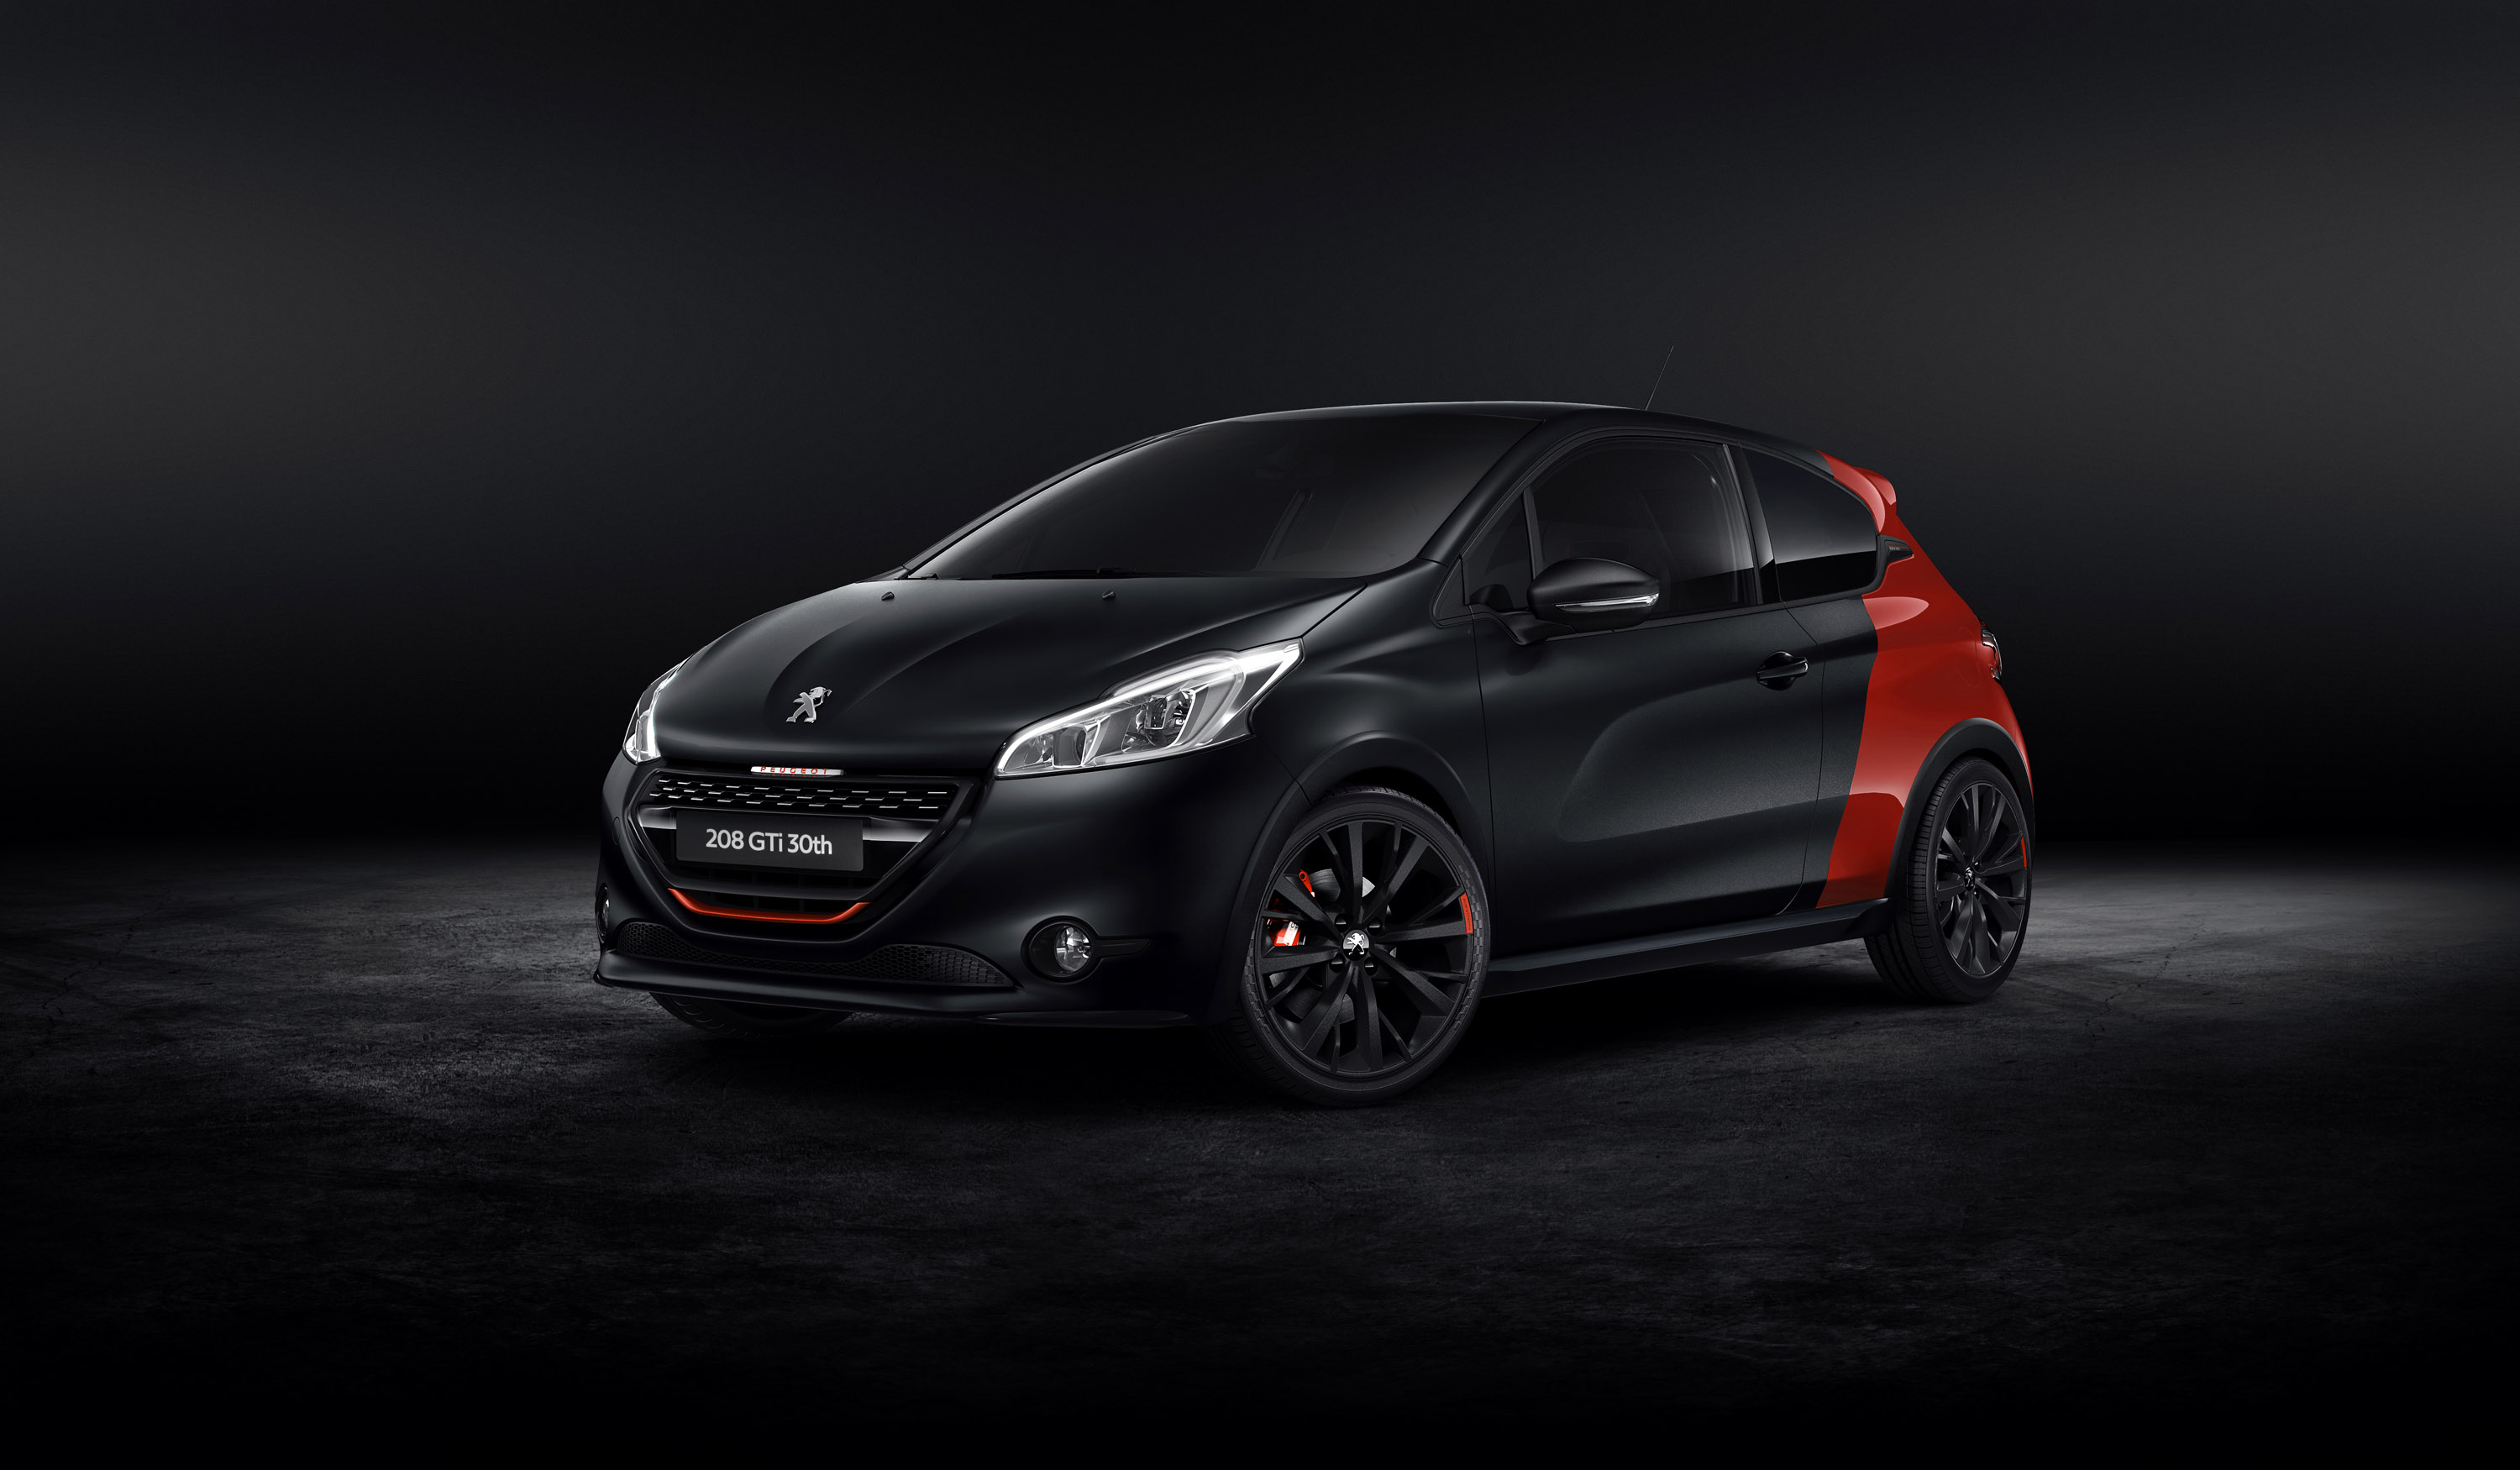 Peugeot 208 GTI 30th Anniversary Limited Edition photo #1